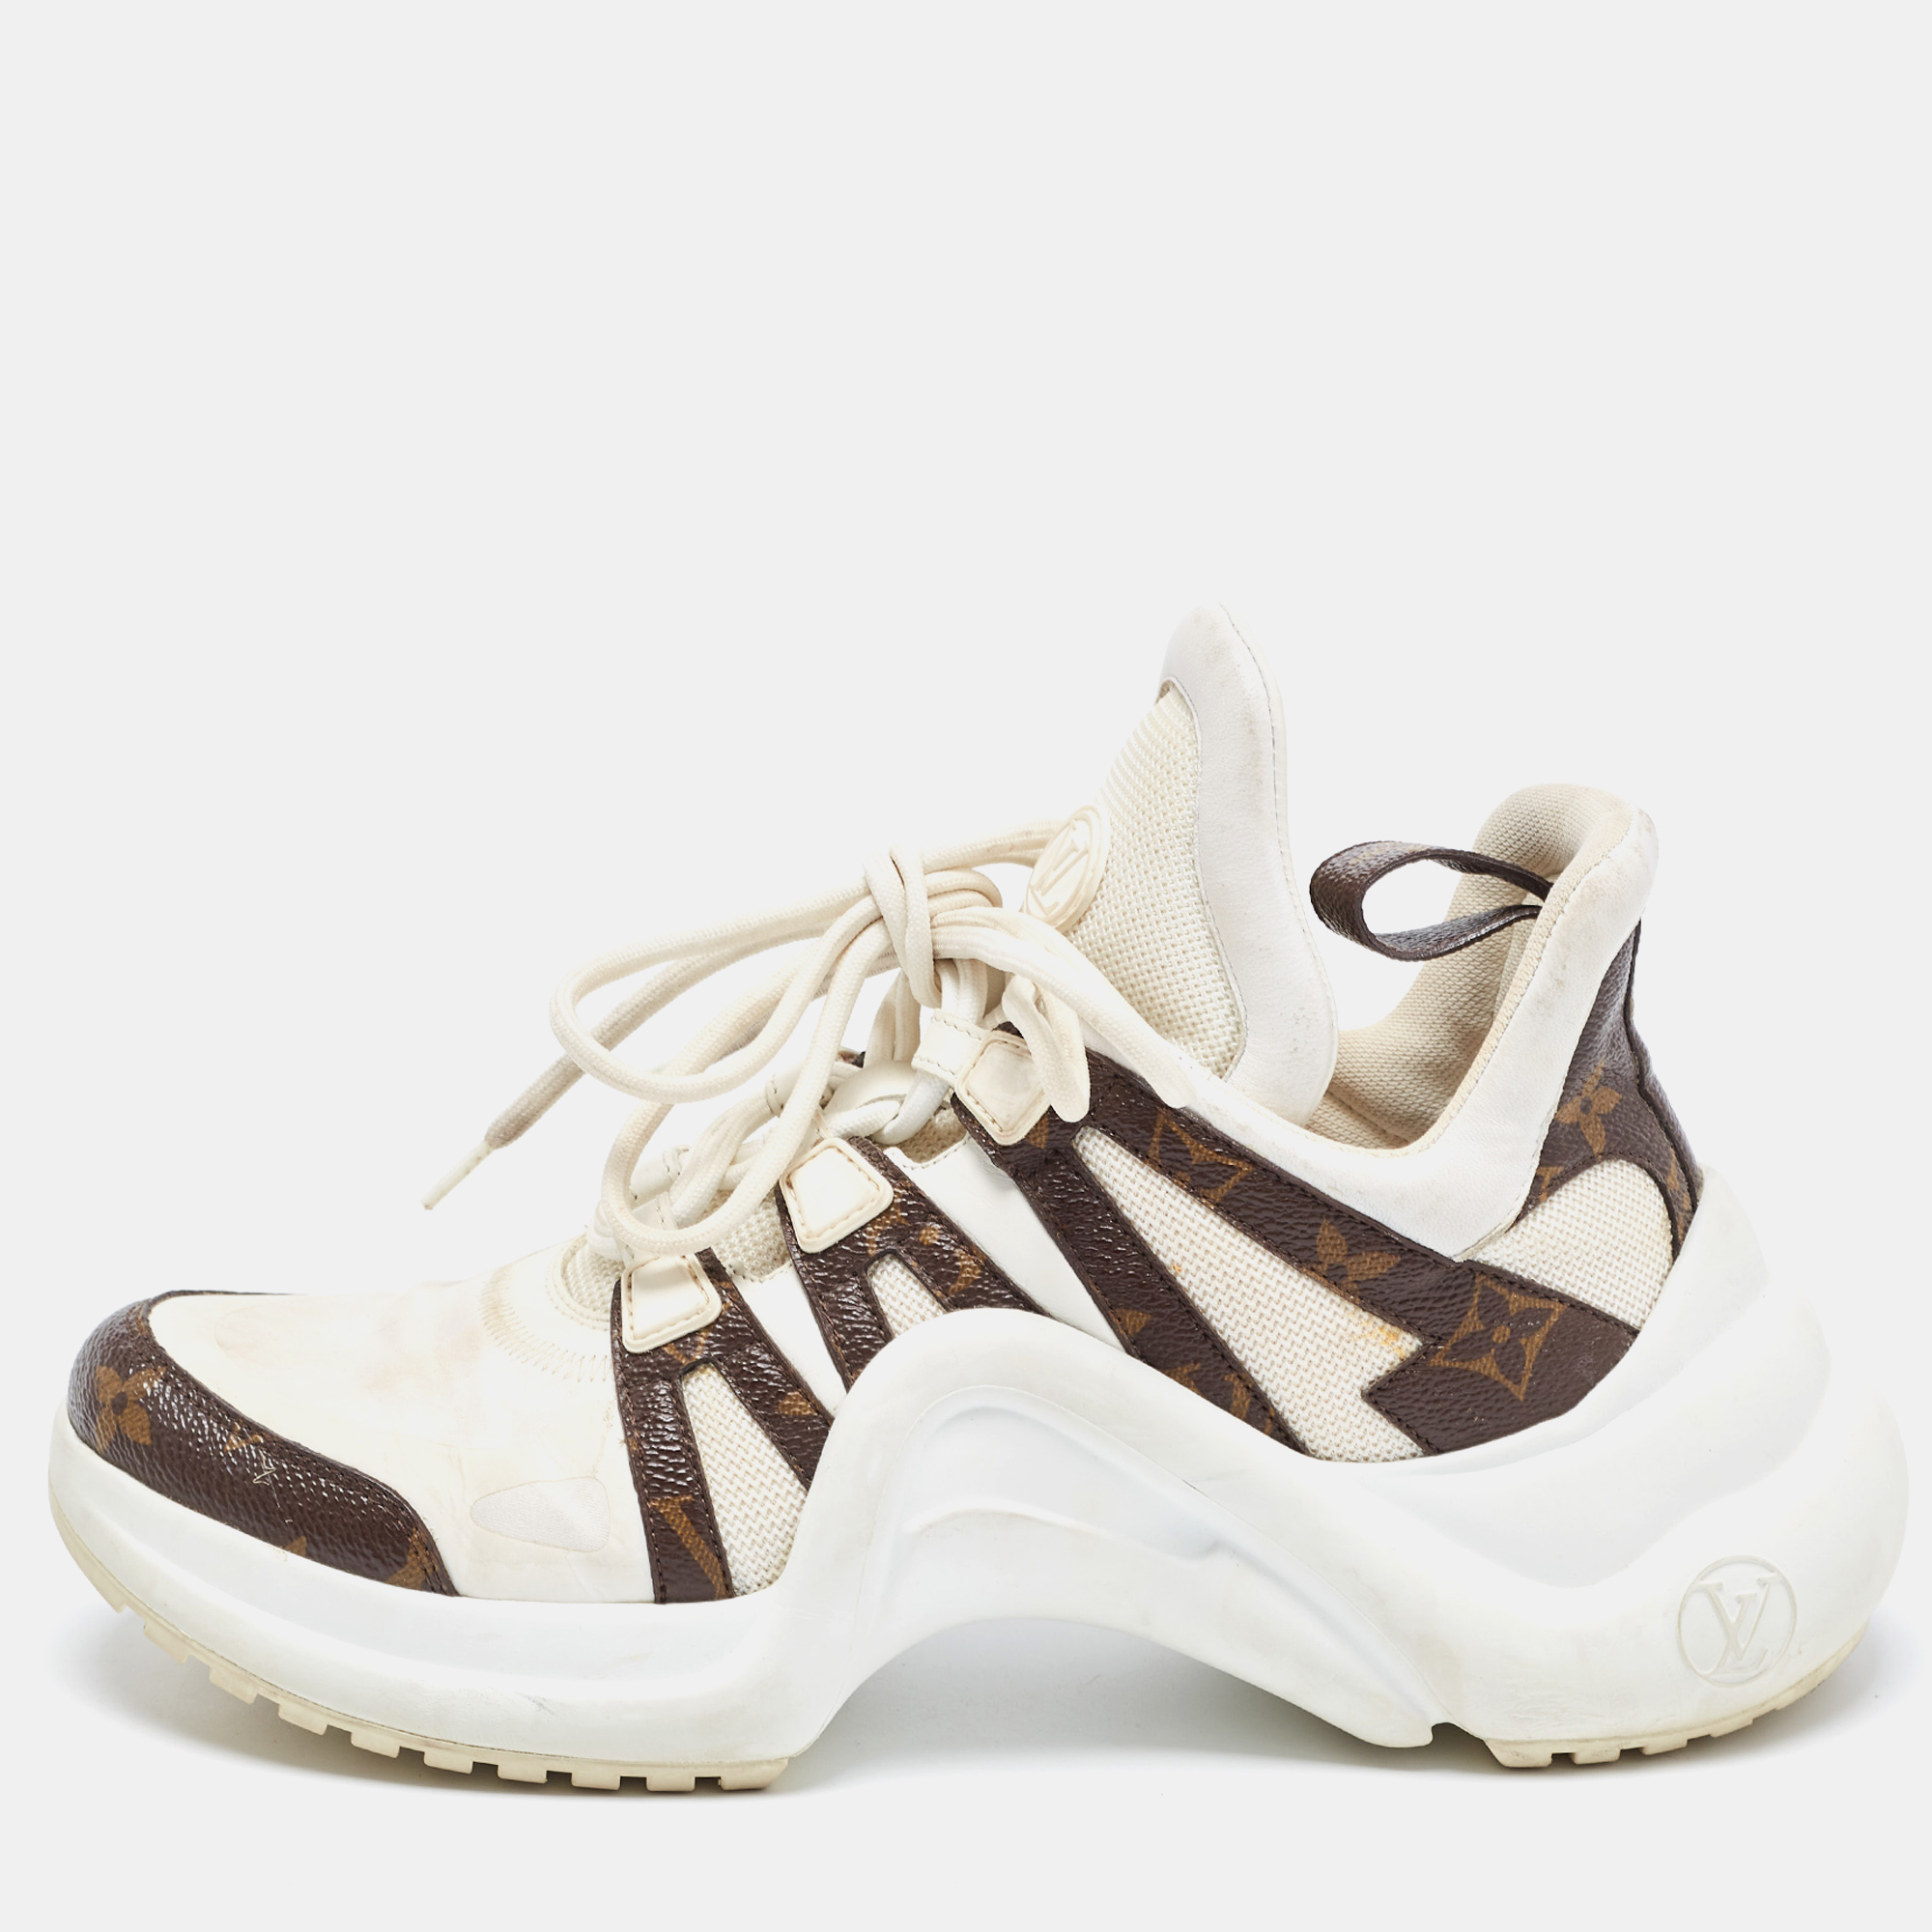 Louis Vuitton White/Brown Canvas And Mesh Archlight Sneakers Size 40